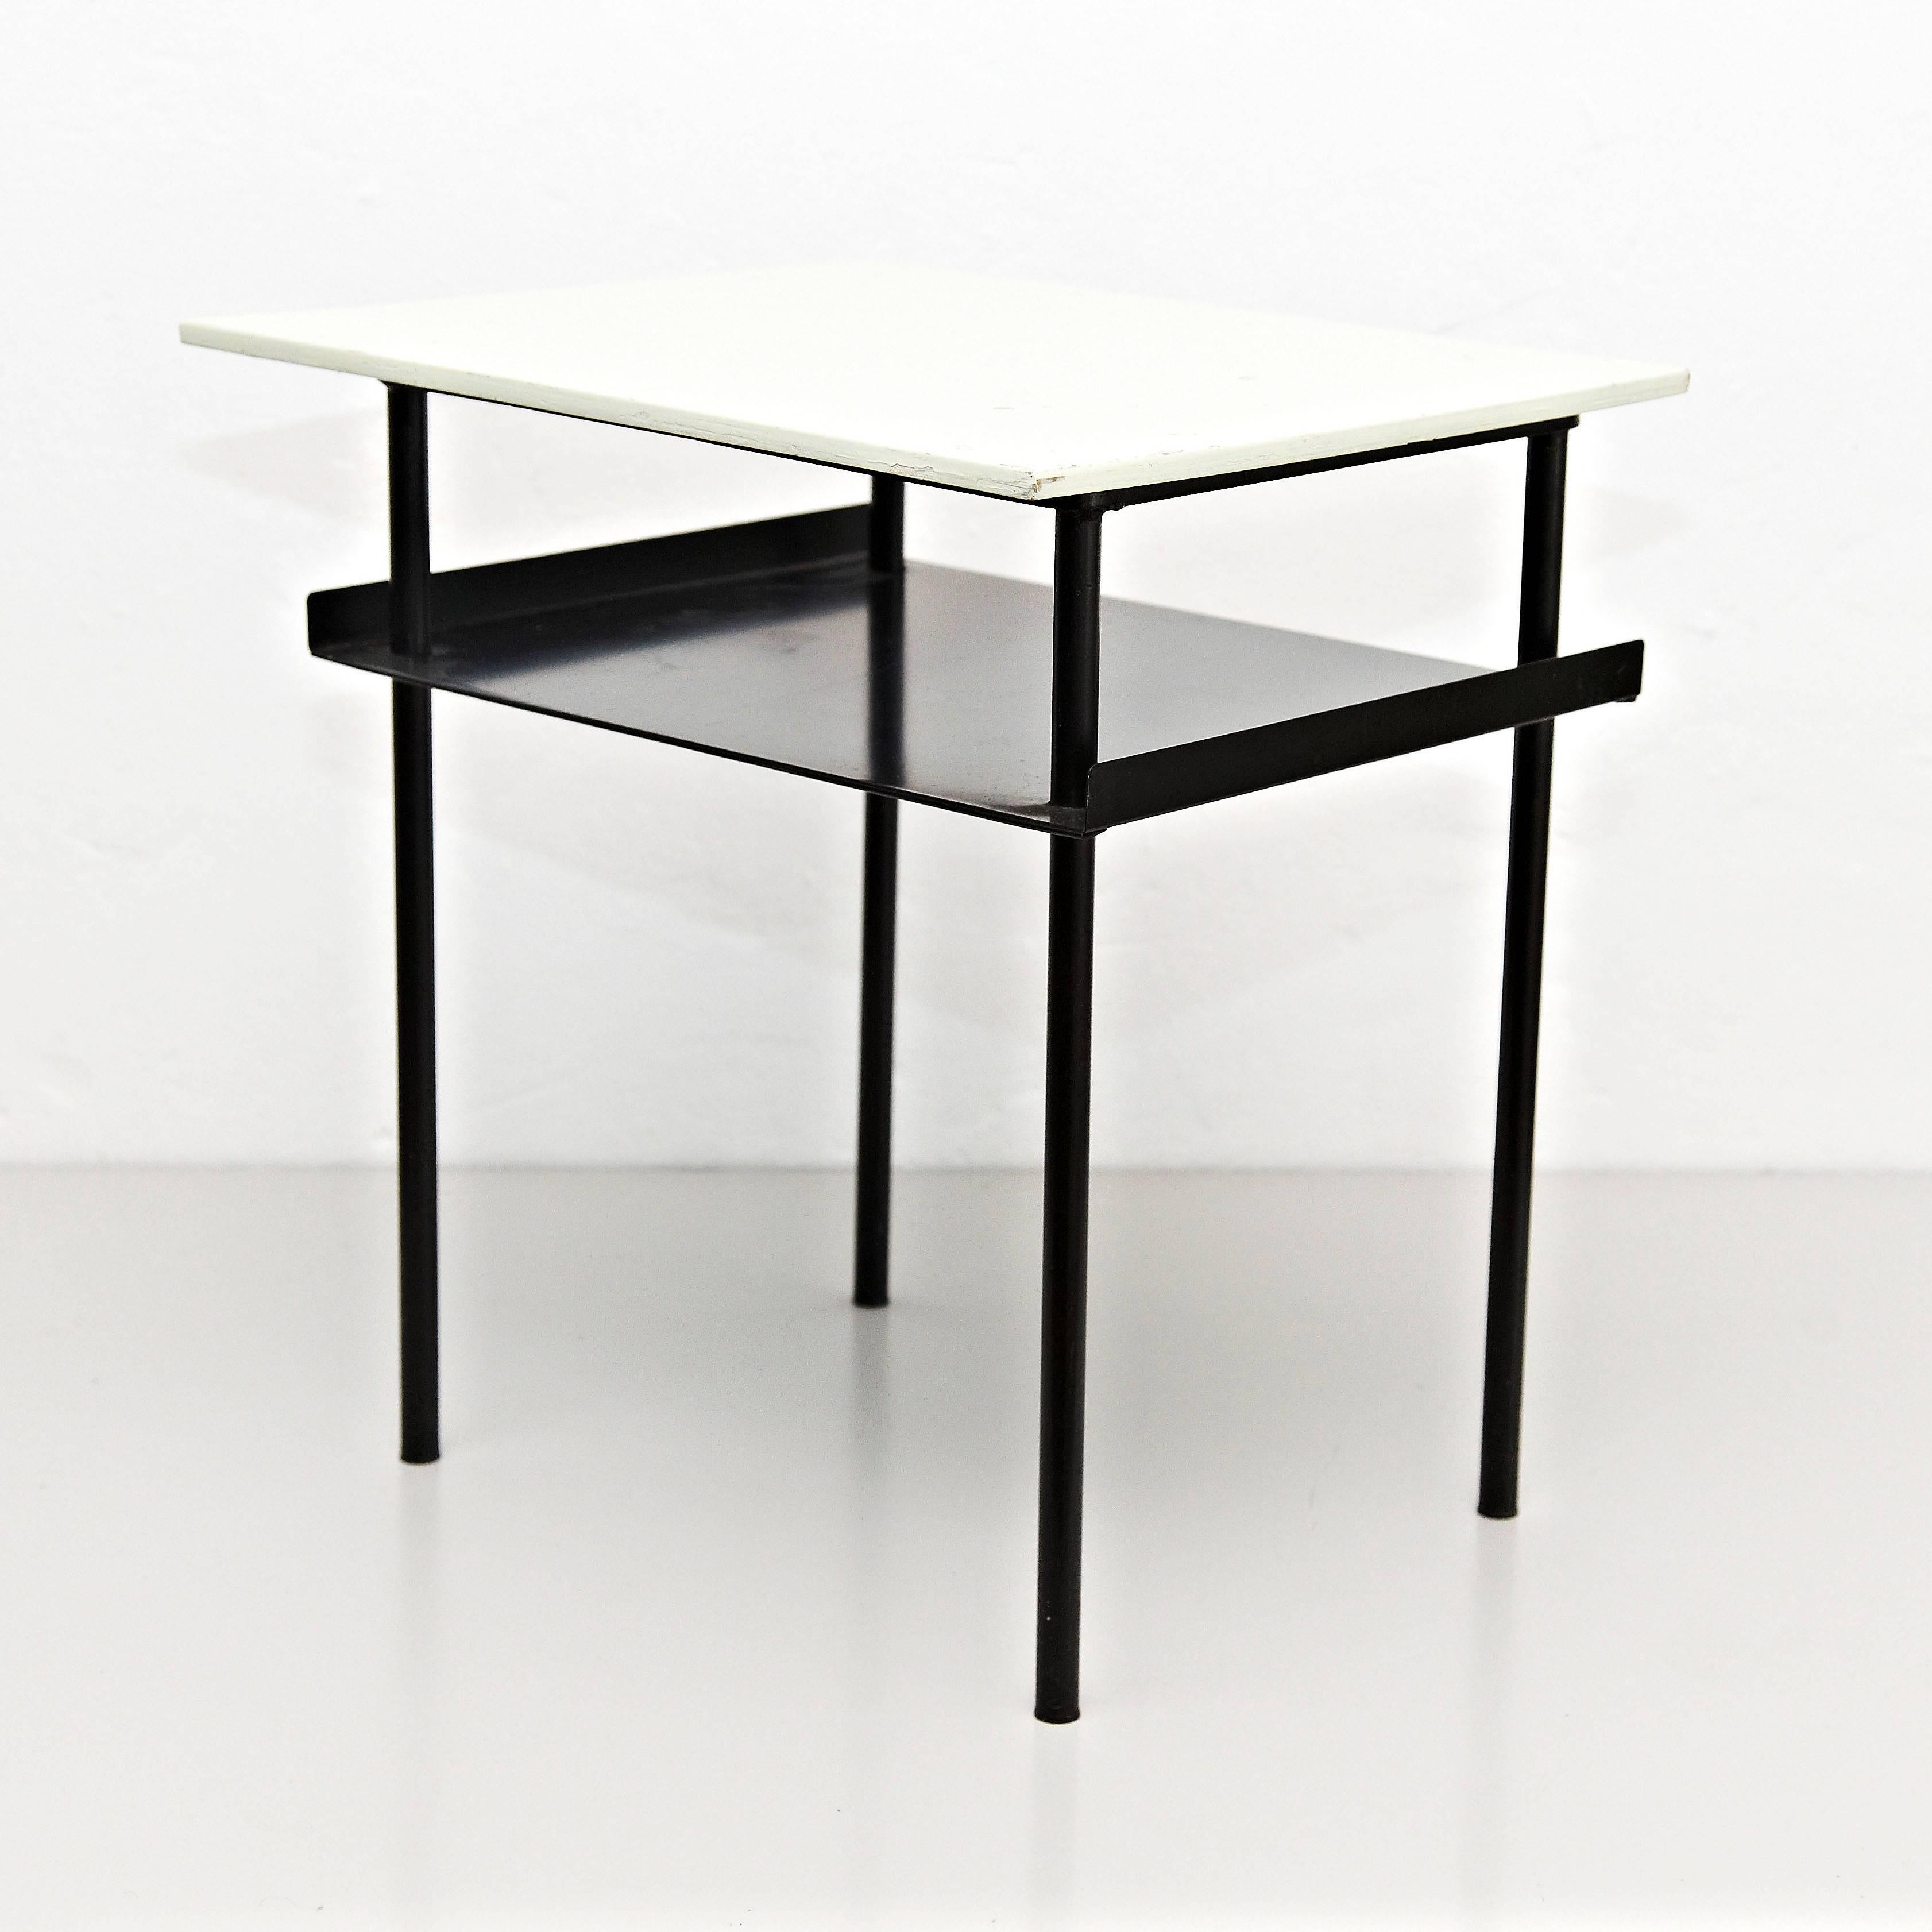 Coffee Table designed by Wim Rietveld around 1950, manufactured in Netherlands.

Lacquered metal frame and wood top.

In good original condition, preserving a beautifull patina.